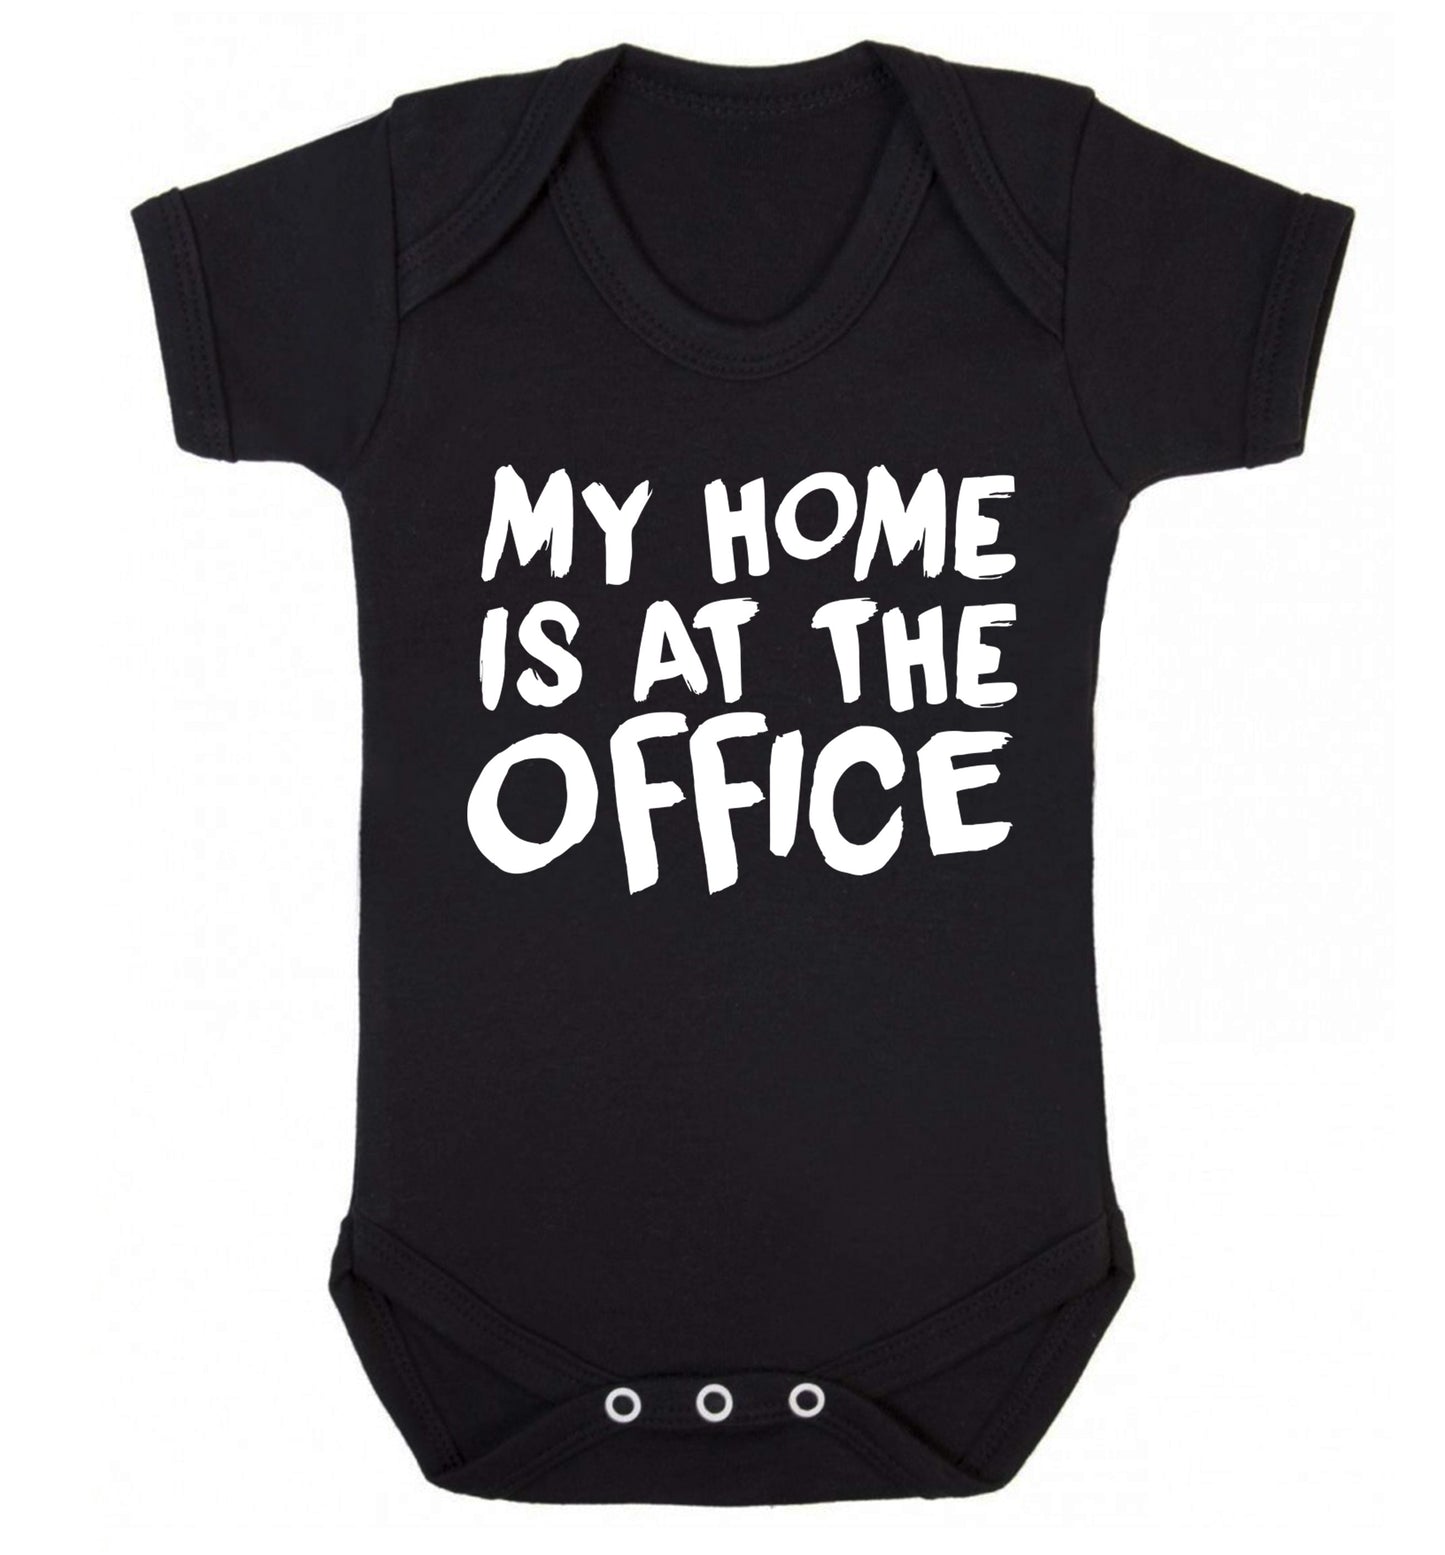 My home is at the office Baby Vest black 18-24 months